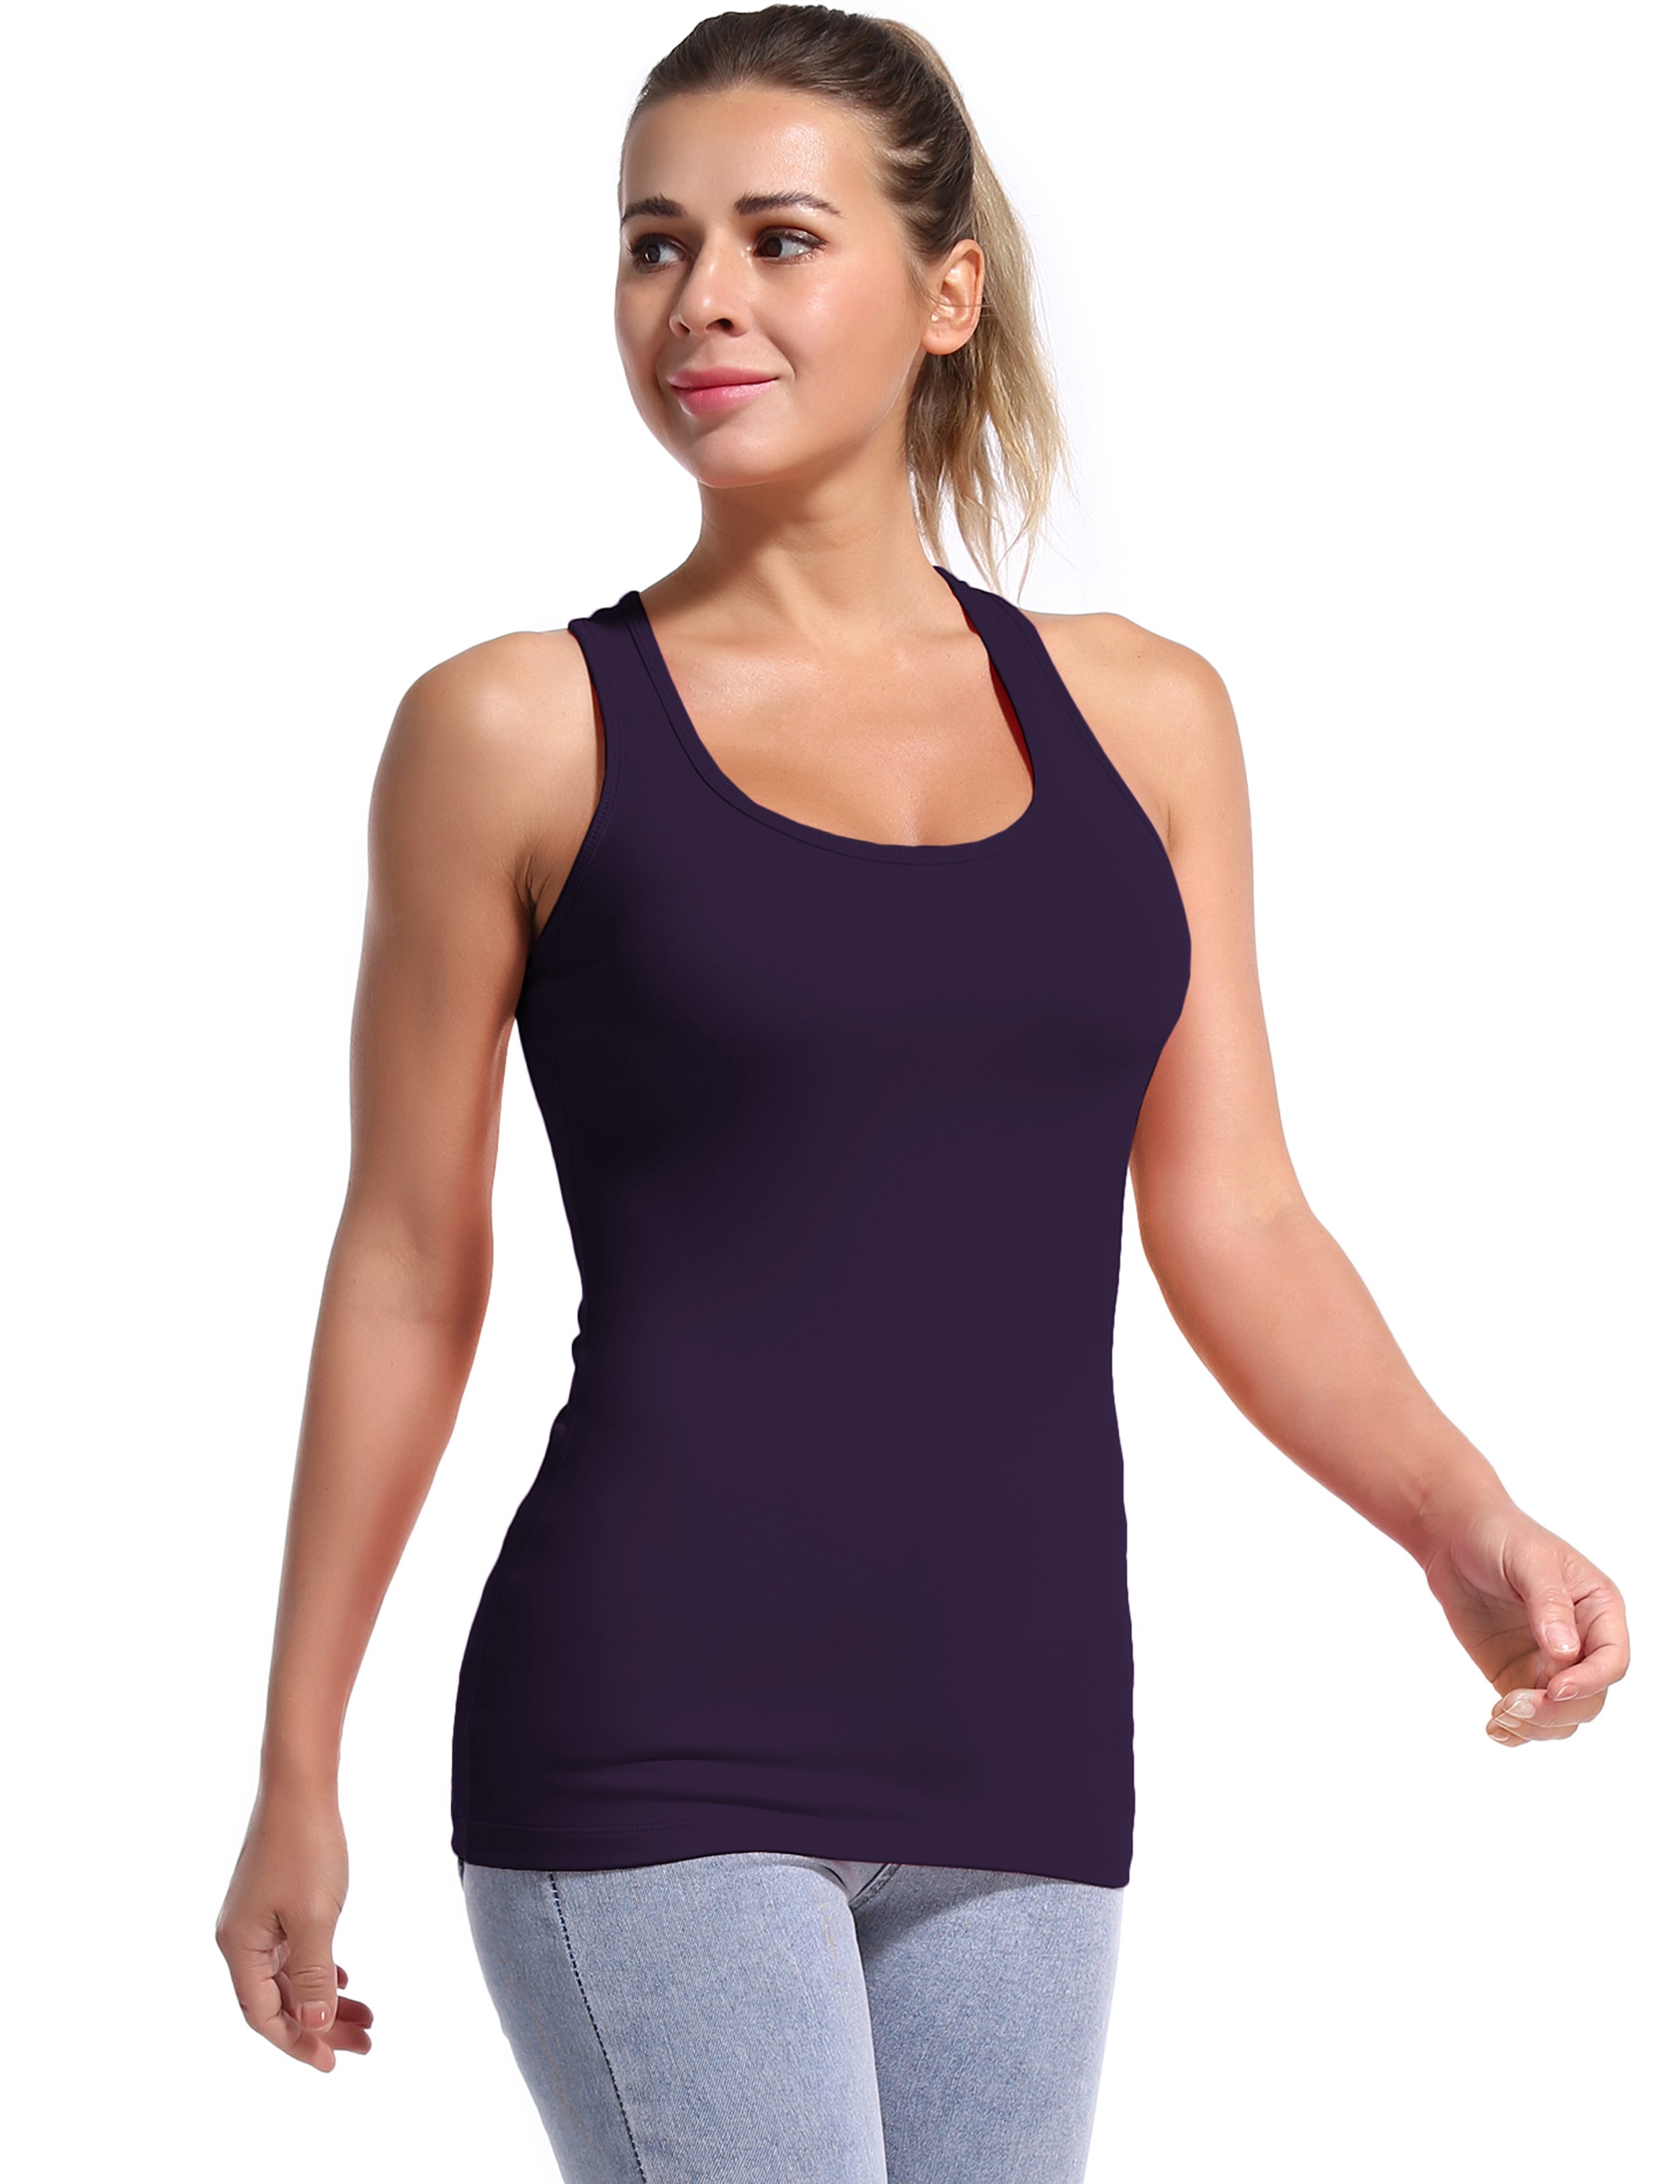 Racerback Athletic Tank Tops midnightblue 92%Nylon/8%Spandex(Cotton Soft) Designed for Gym Tight Fit So buttery soft, it feels weightless Sweat-wicking Four-way stretch Breathable Contours your body Sits below the waistband for moderate, everyday coverage